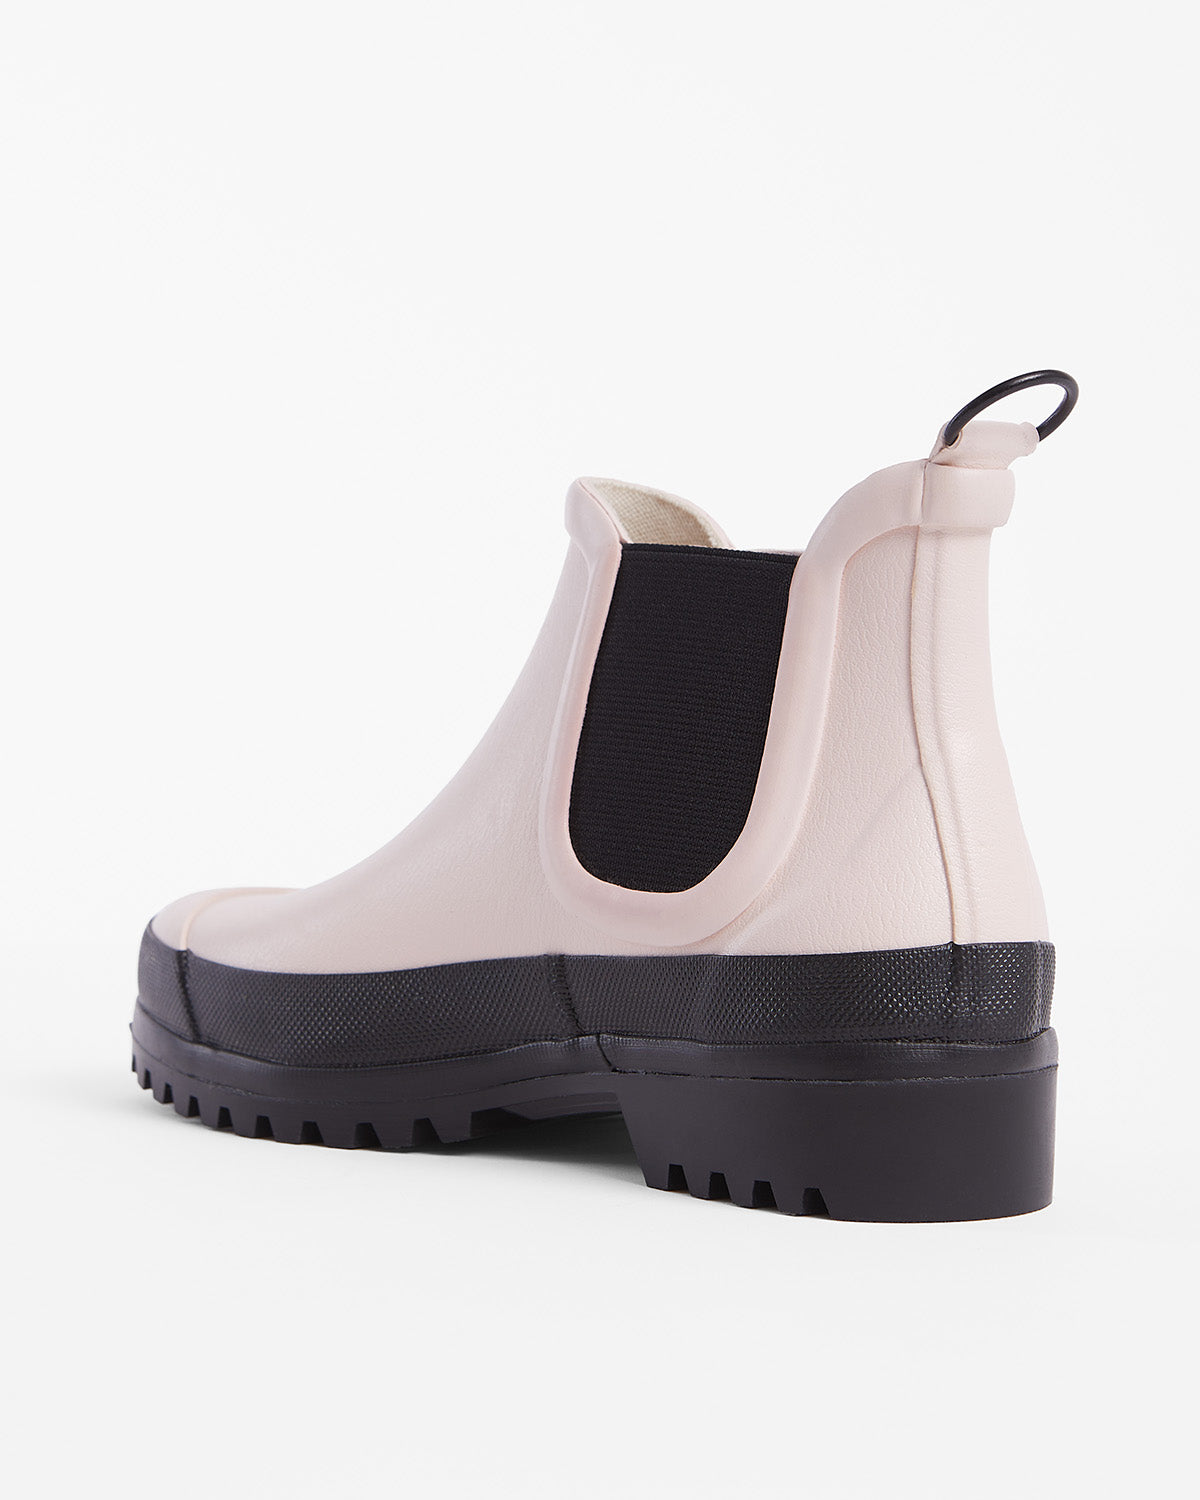 Chelsea Rainboots in color Peach with black sole by Ilse Jacobsen